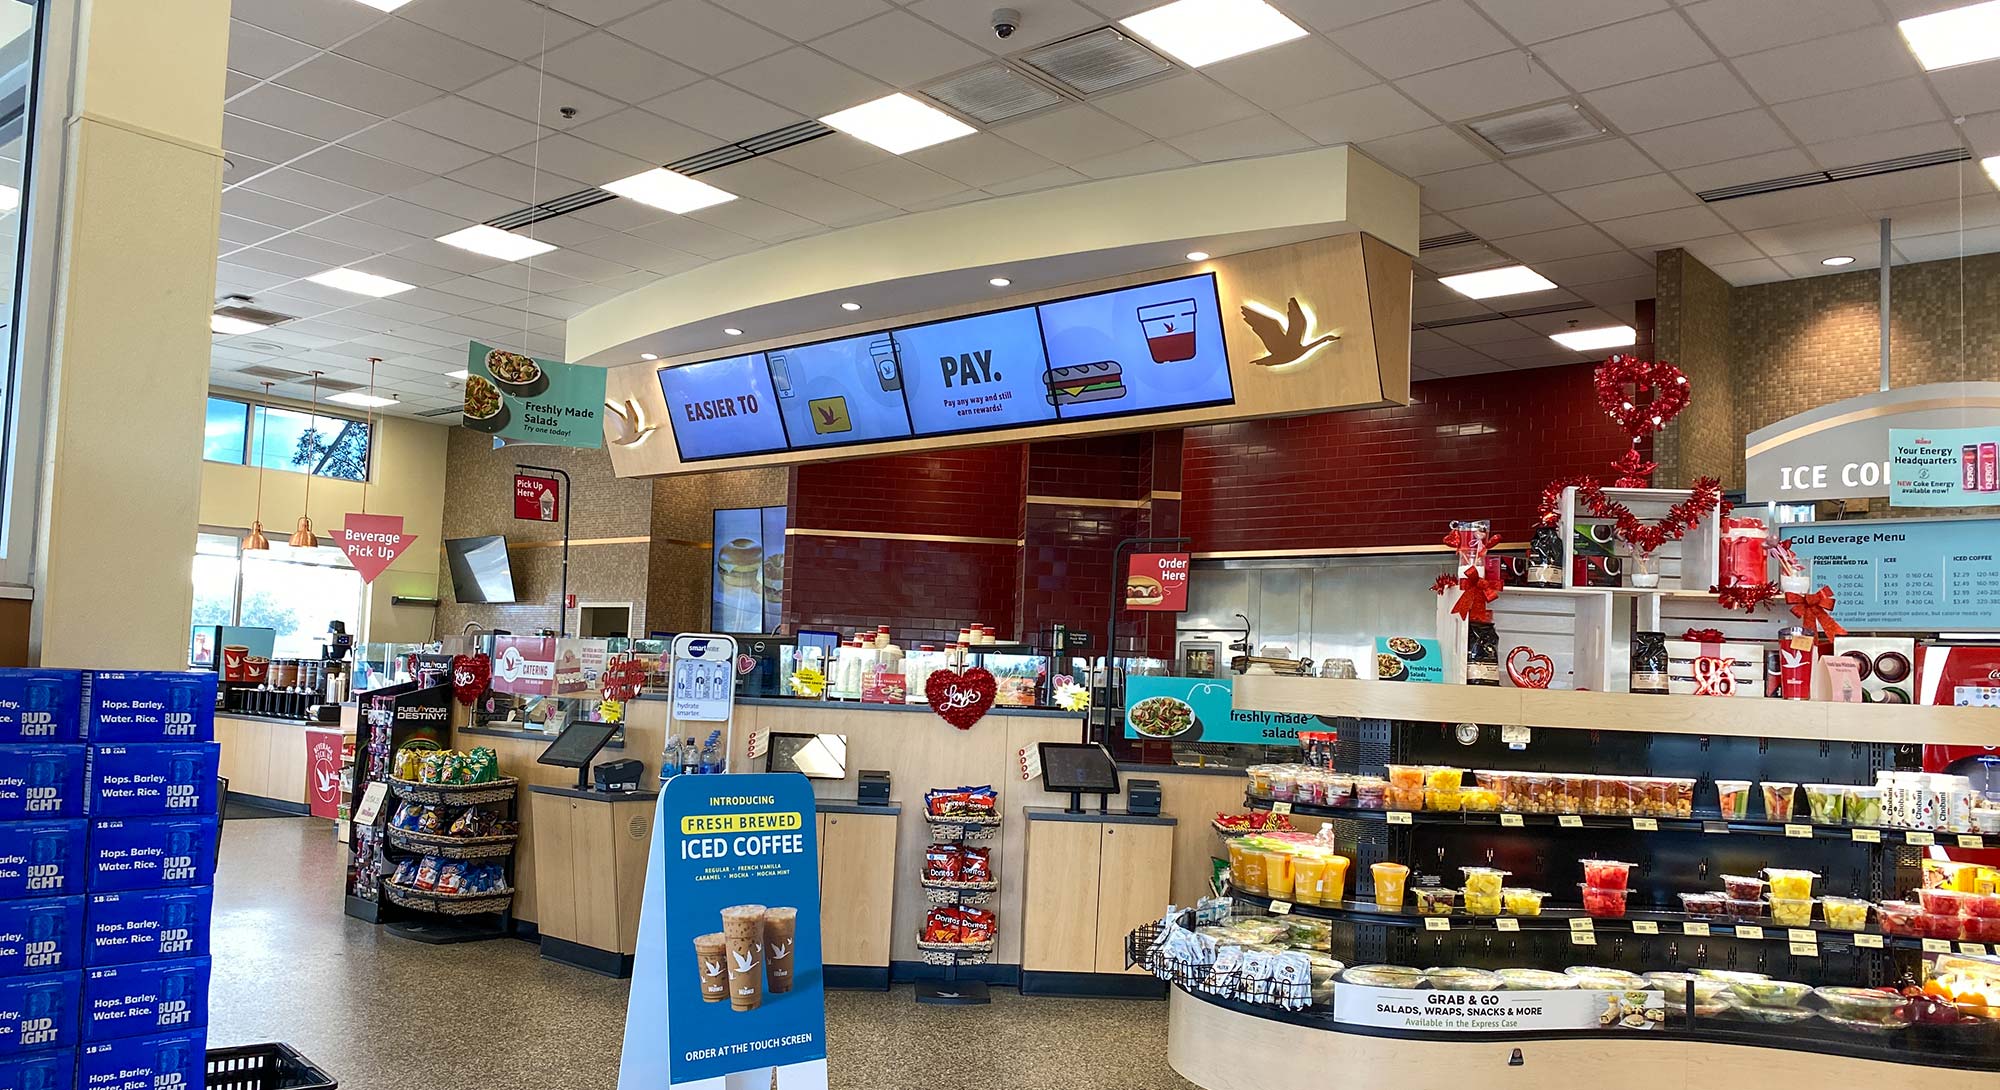 Convenience store with cloud-based video surveillance cameras on ceiling.